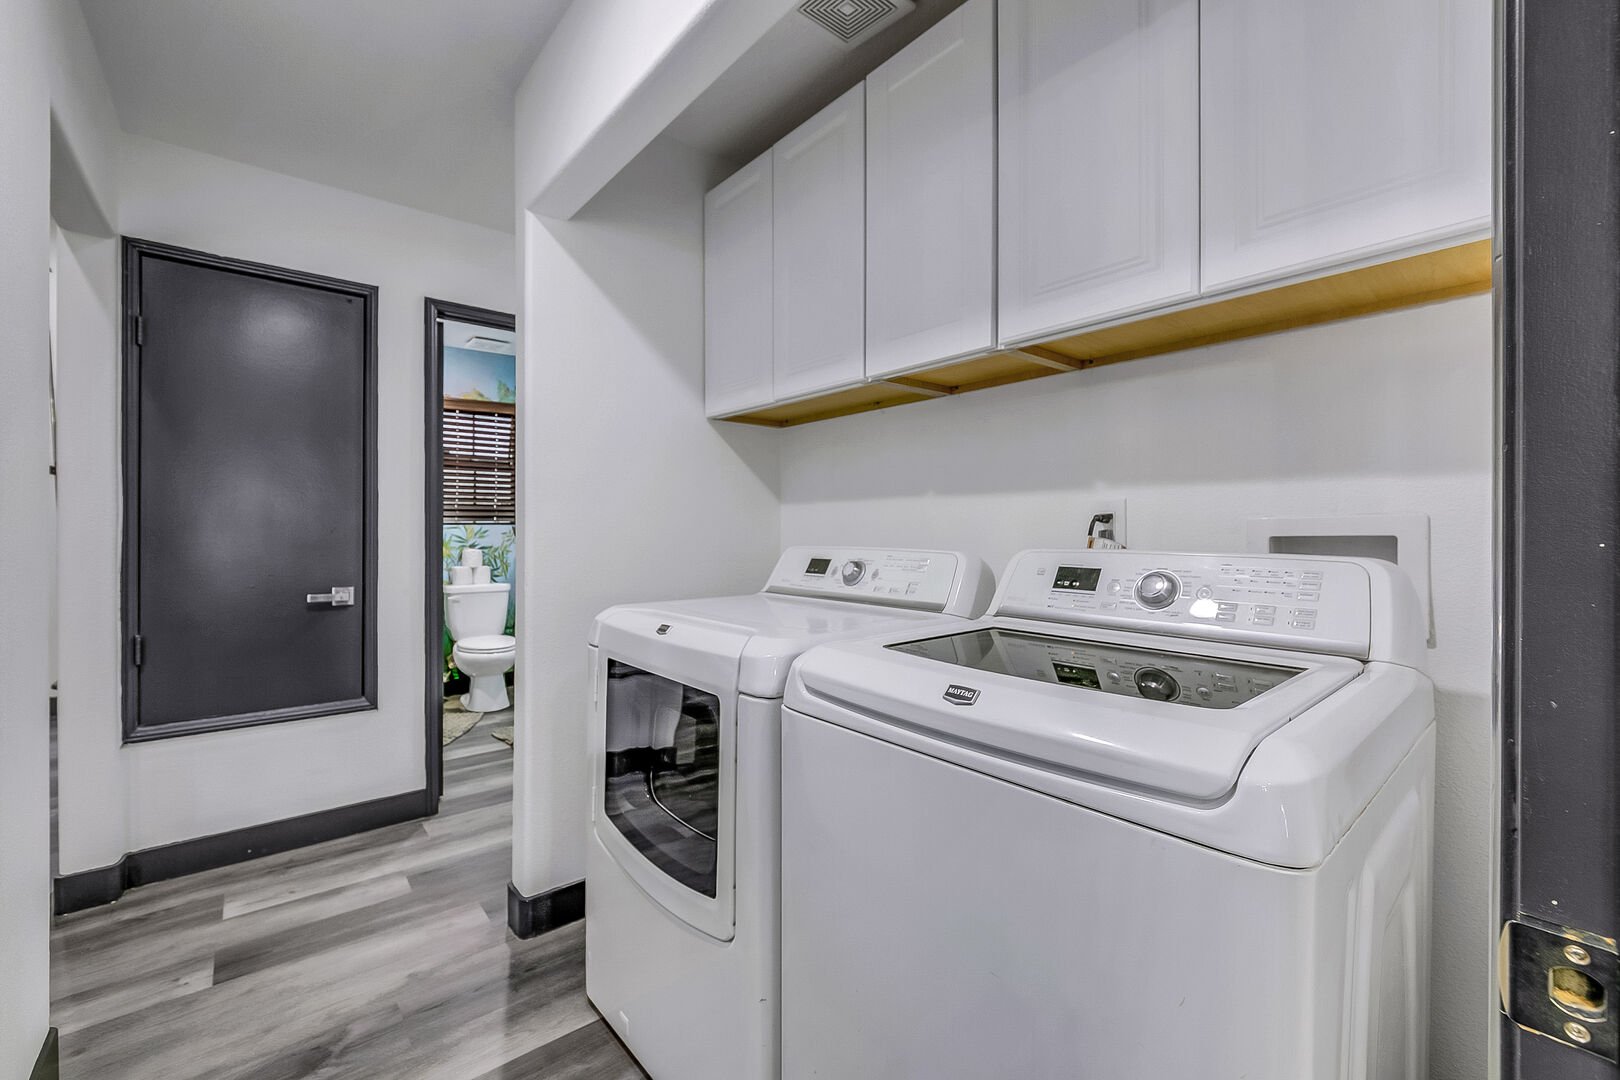 The fully equipped laundry room with washer, dryer, ironing board, iron, and laundry pods.